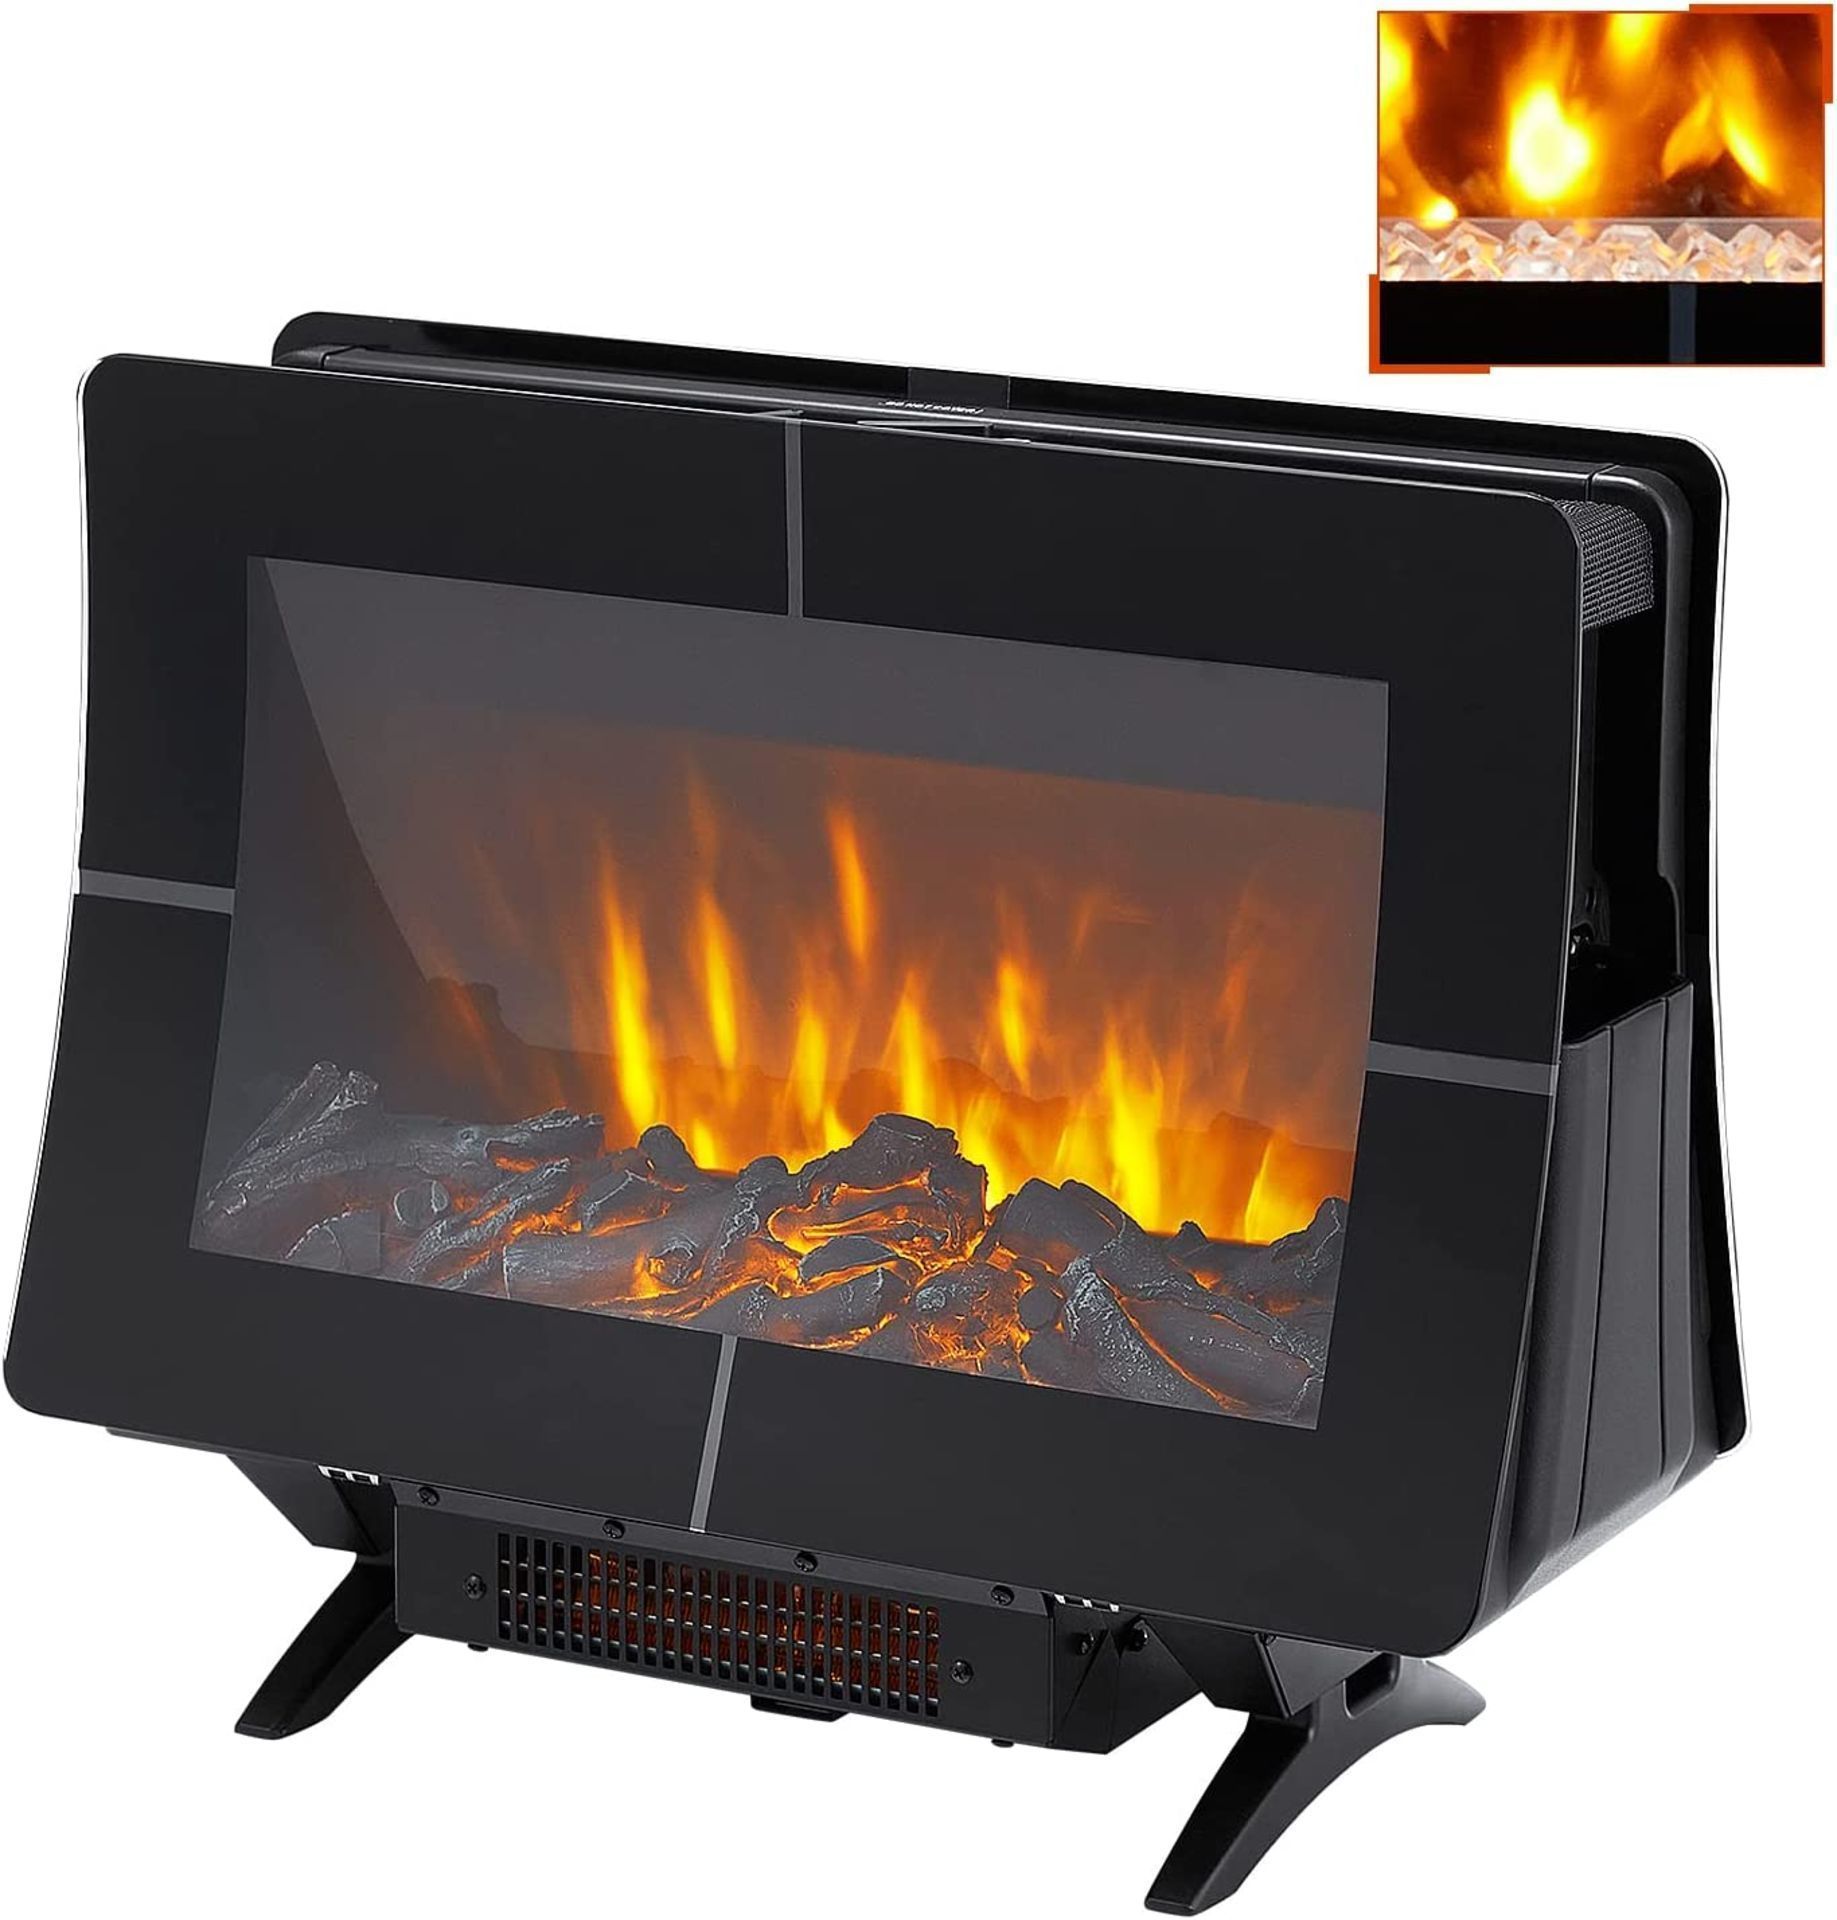 TRADE LOT 10 X 1000/2000W Freestanding Electric Fireplace Double-sided Heating Electric Fires